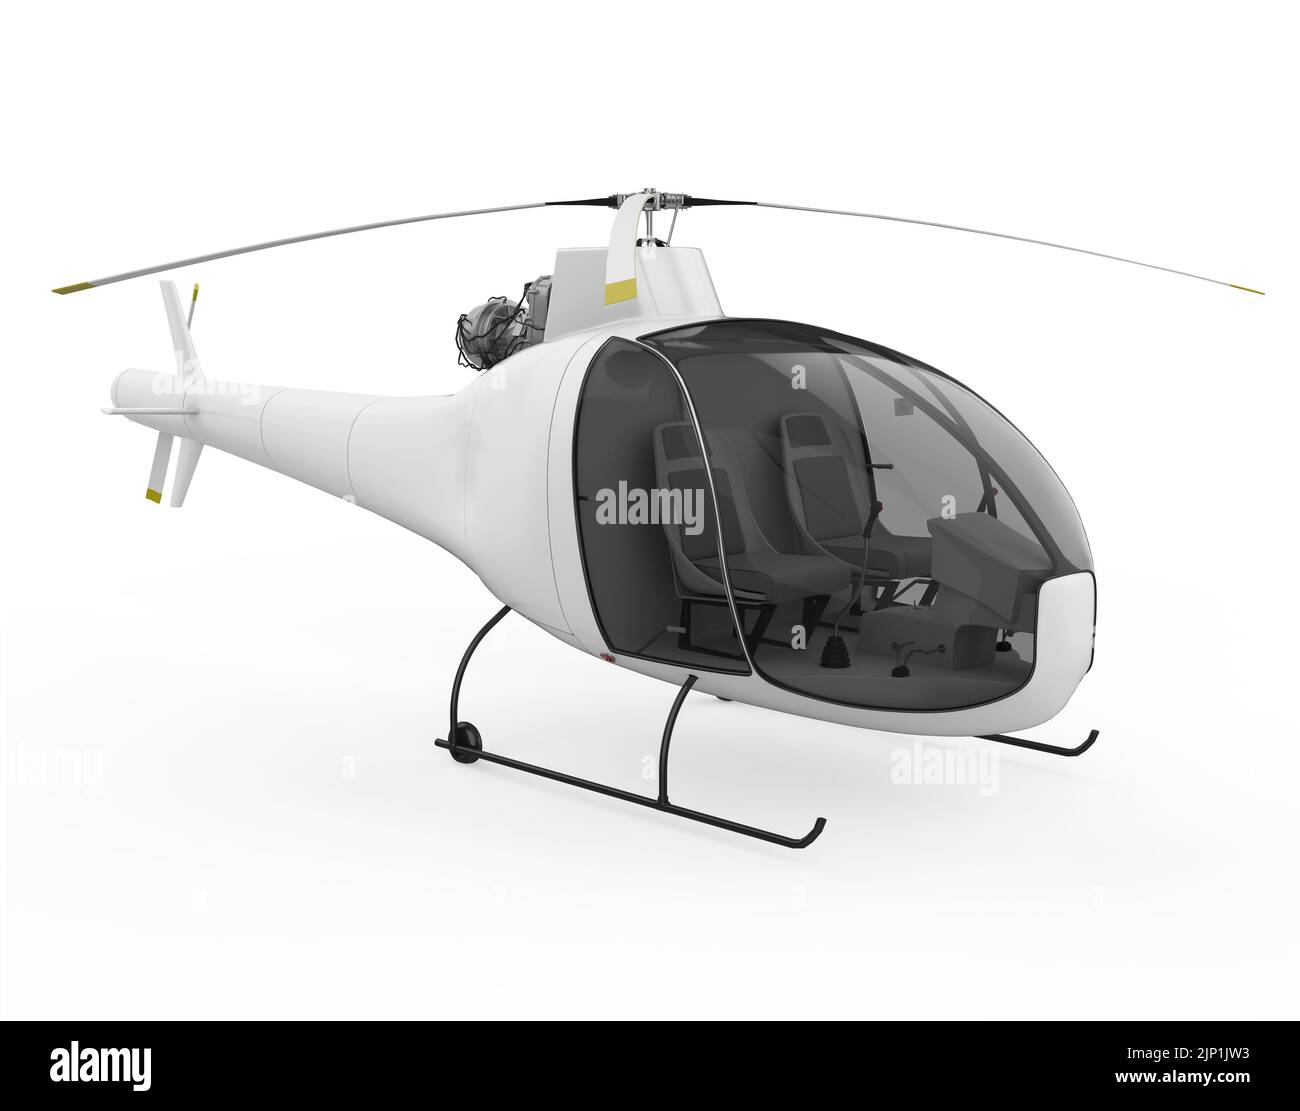 Helicopter Isolated Stock Photo